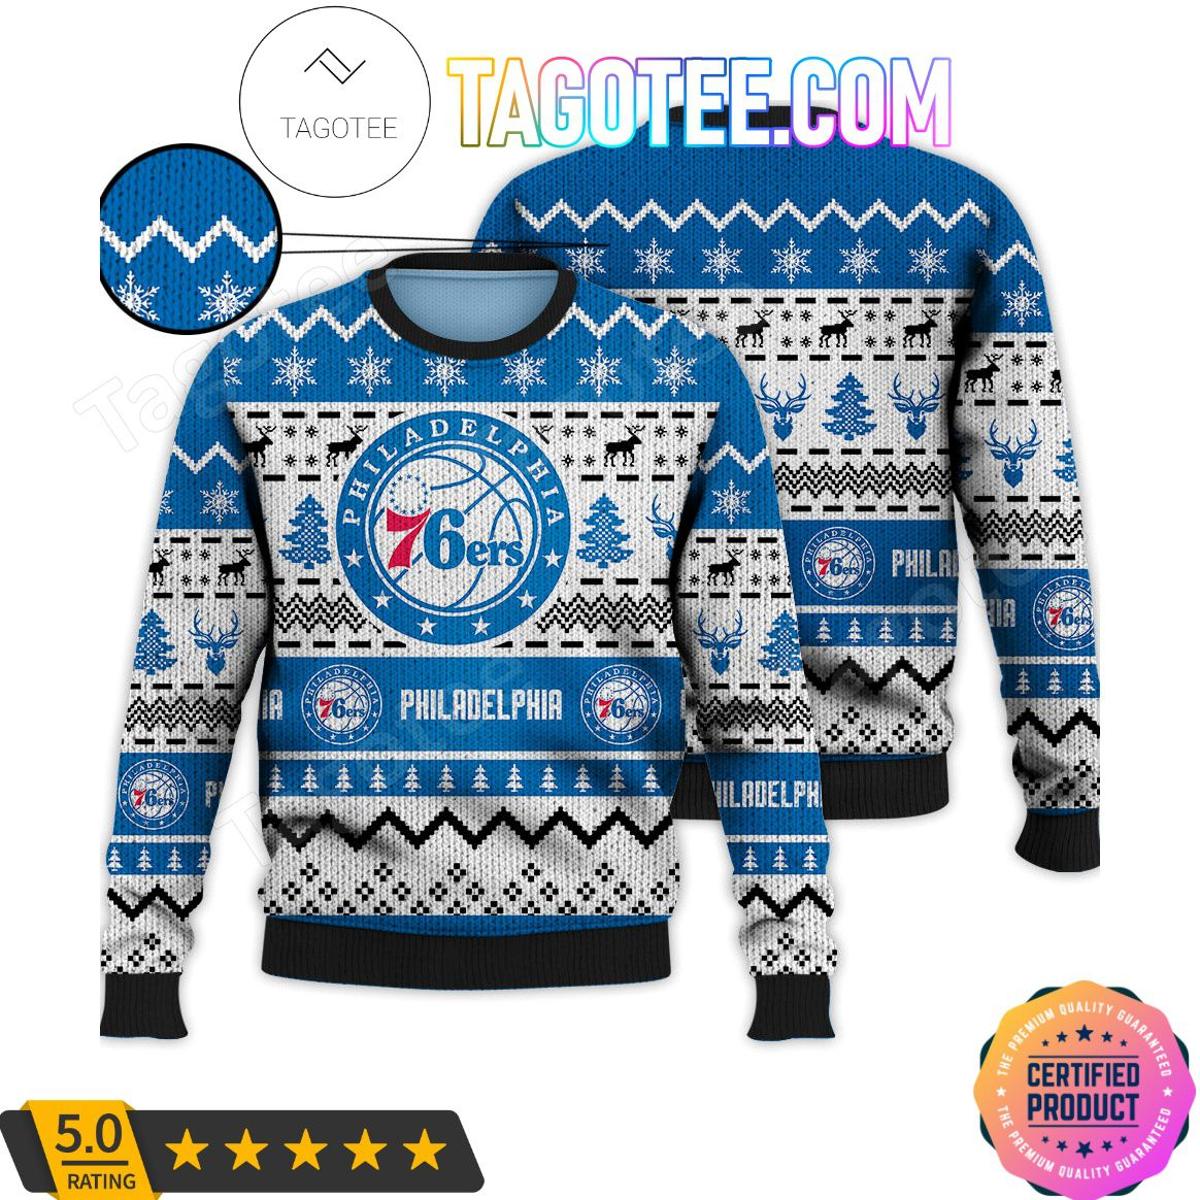 Memphis Grizzlies Blue Yellow Ugly Christmas Sweater Gift